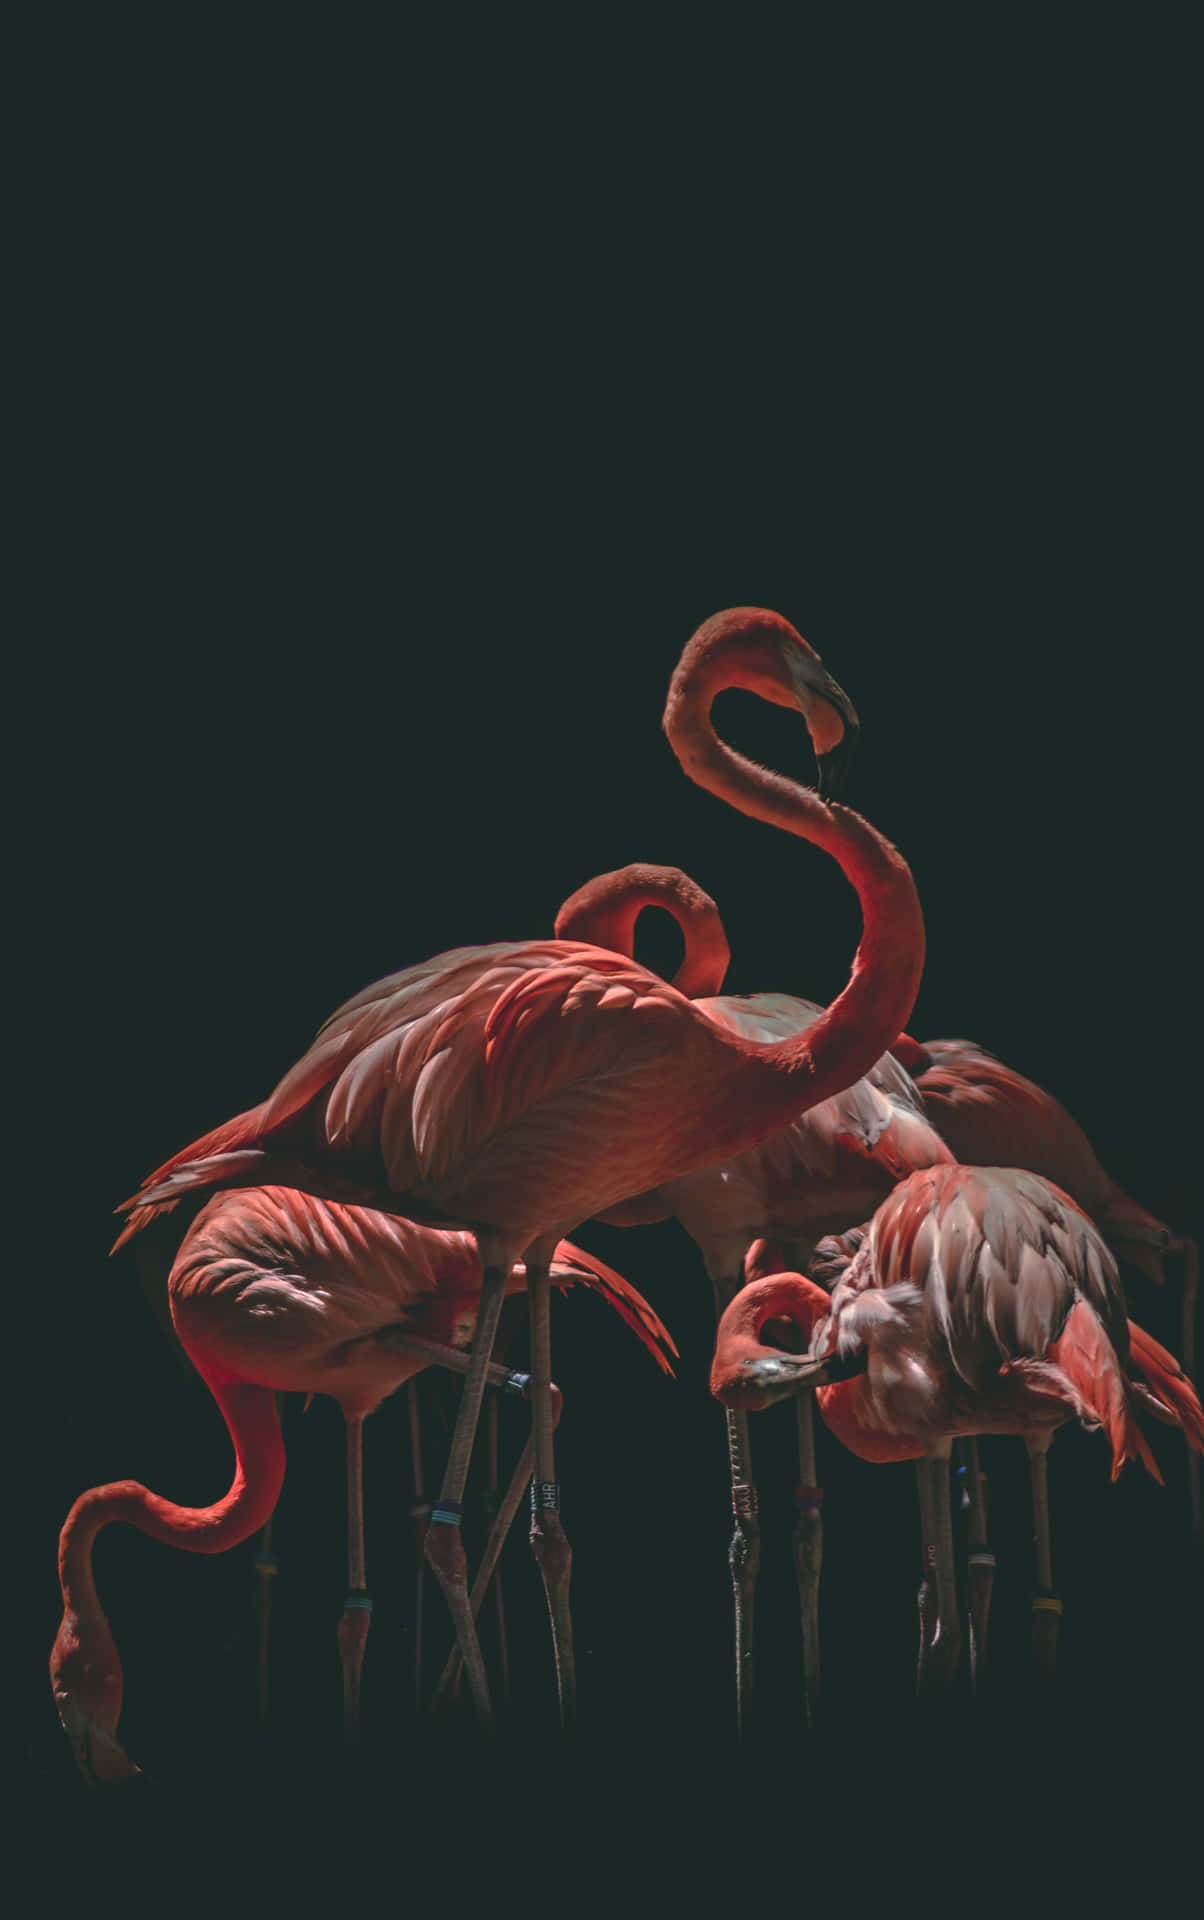 "Be Right at Home with this Stunning Photography of a Flamingo on iPhone" Wallpaper